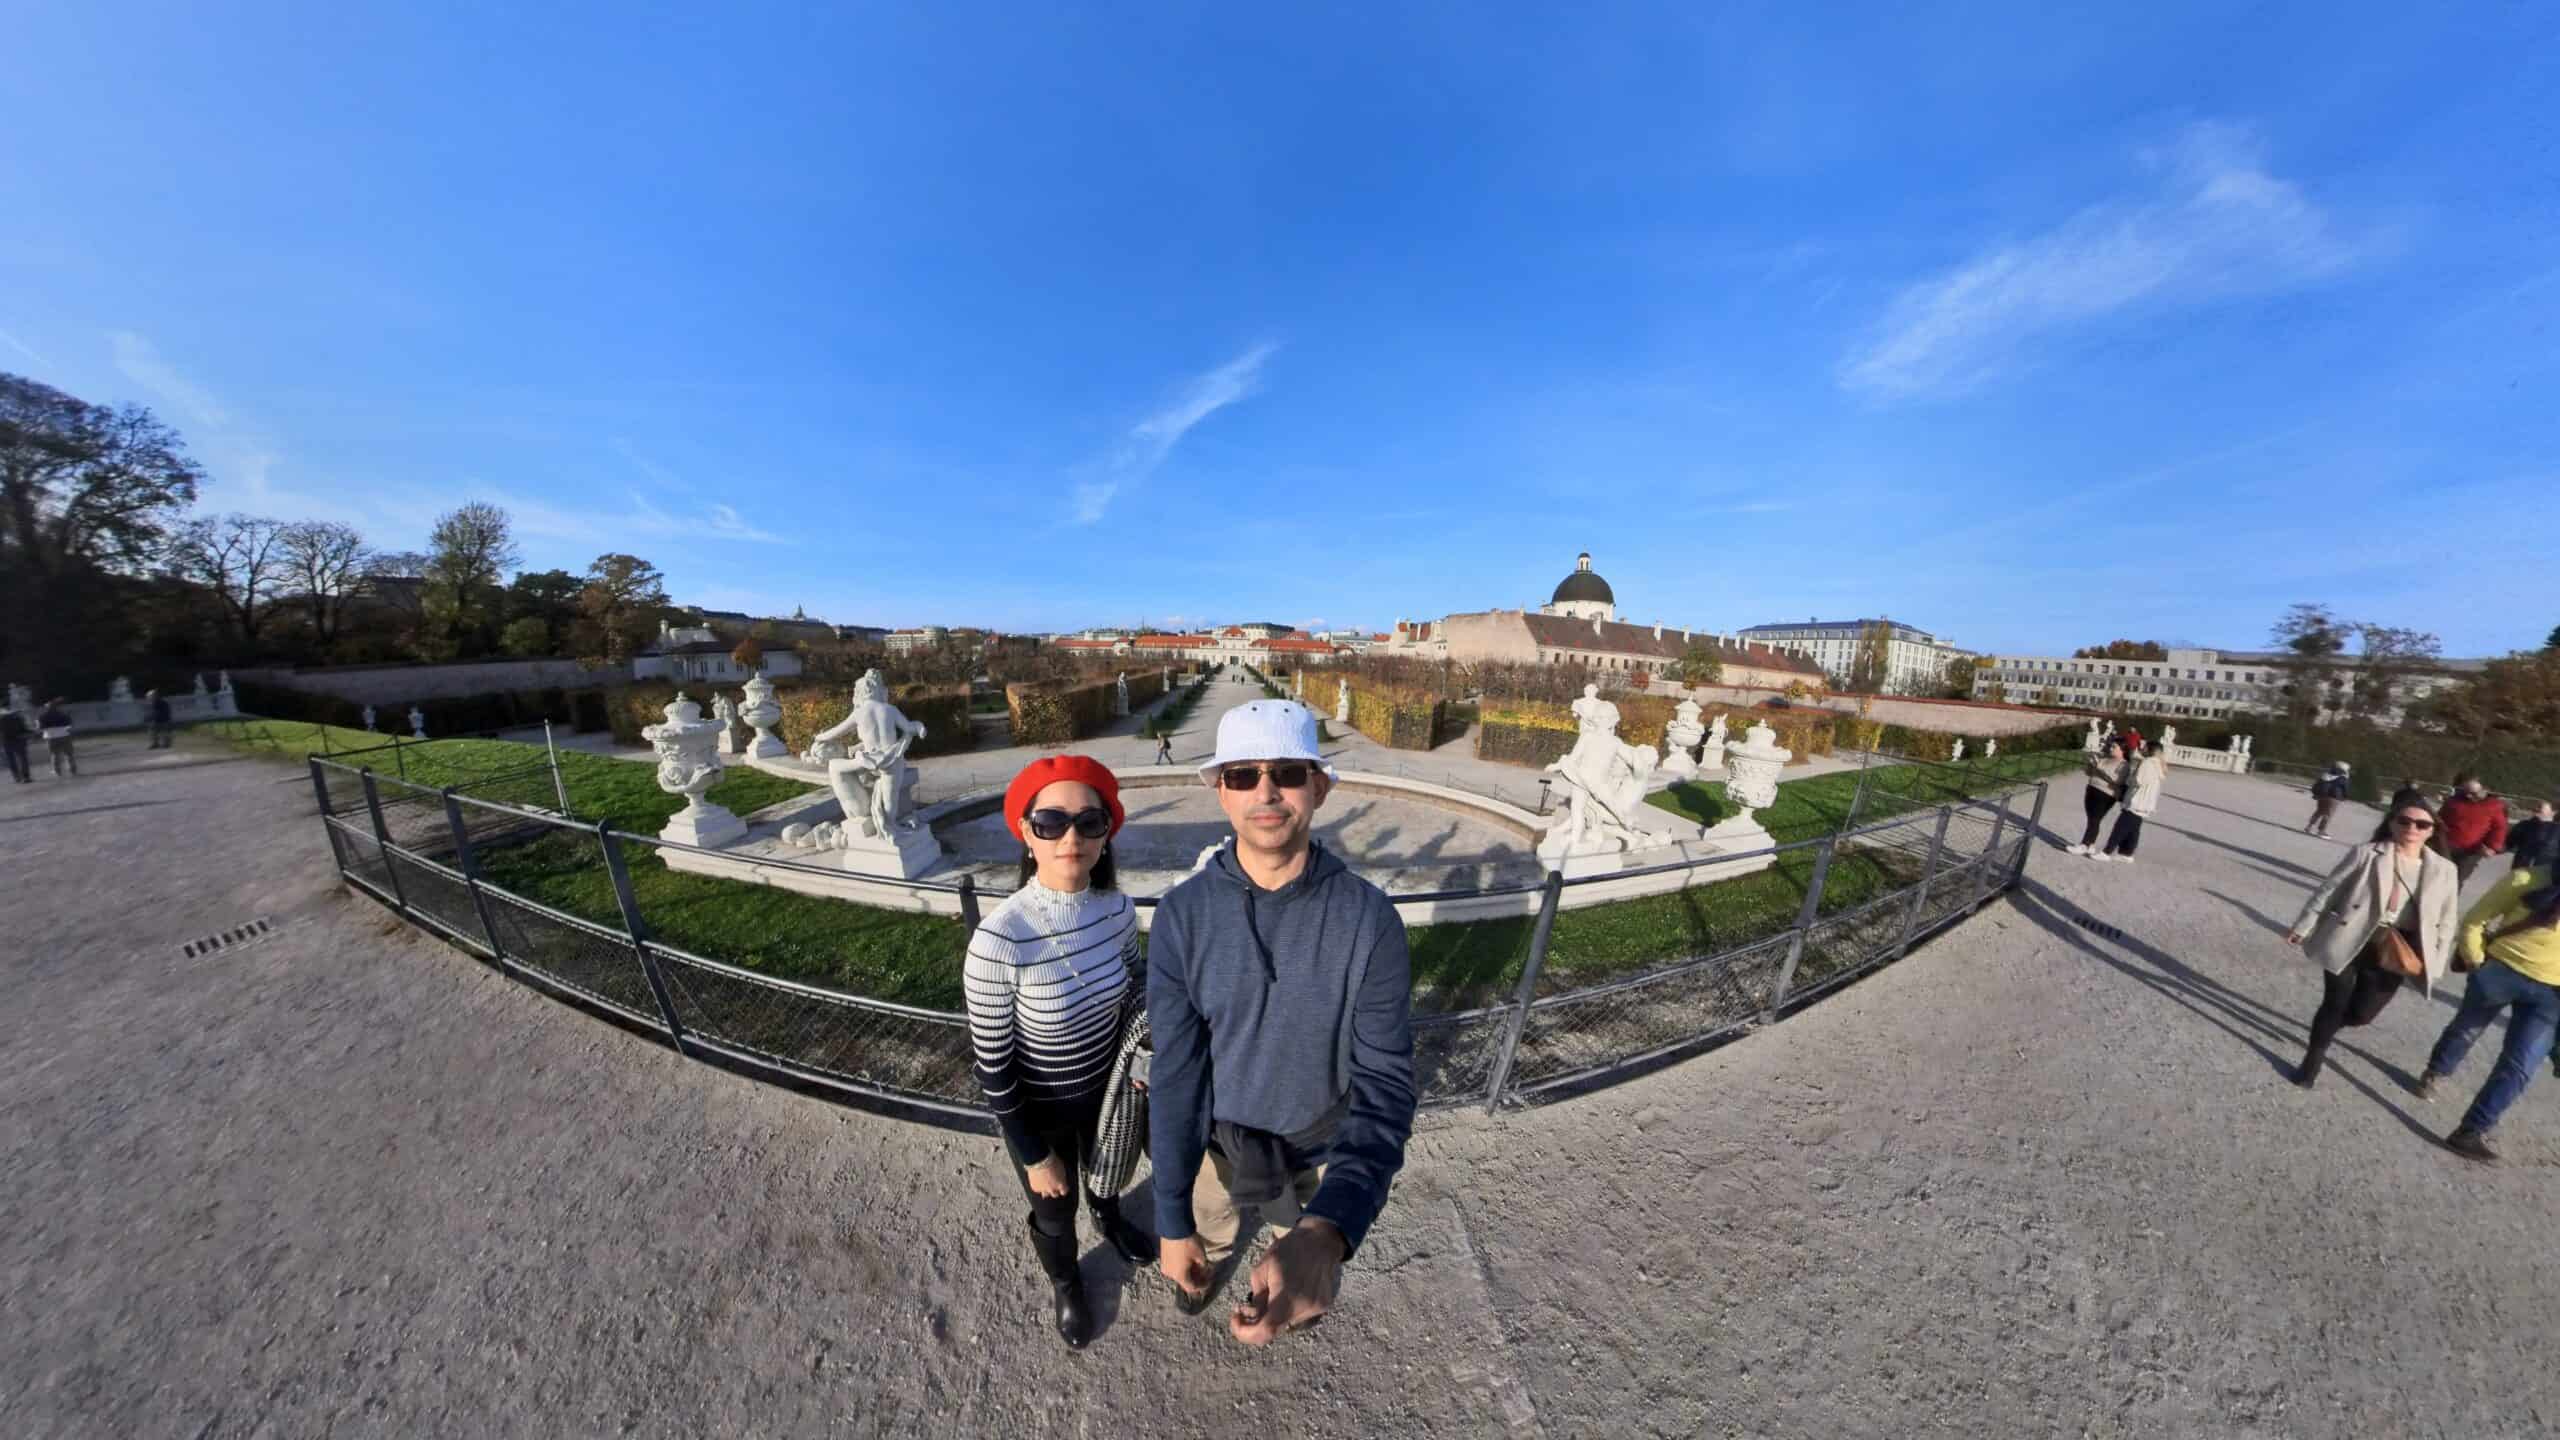 Belvedere Palace Gardens in Vienna taken with Insta360 cam unique wide angle perspective